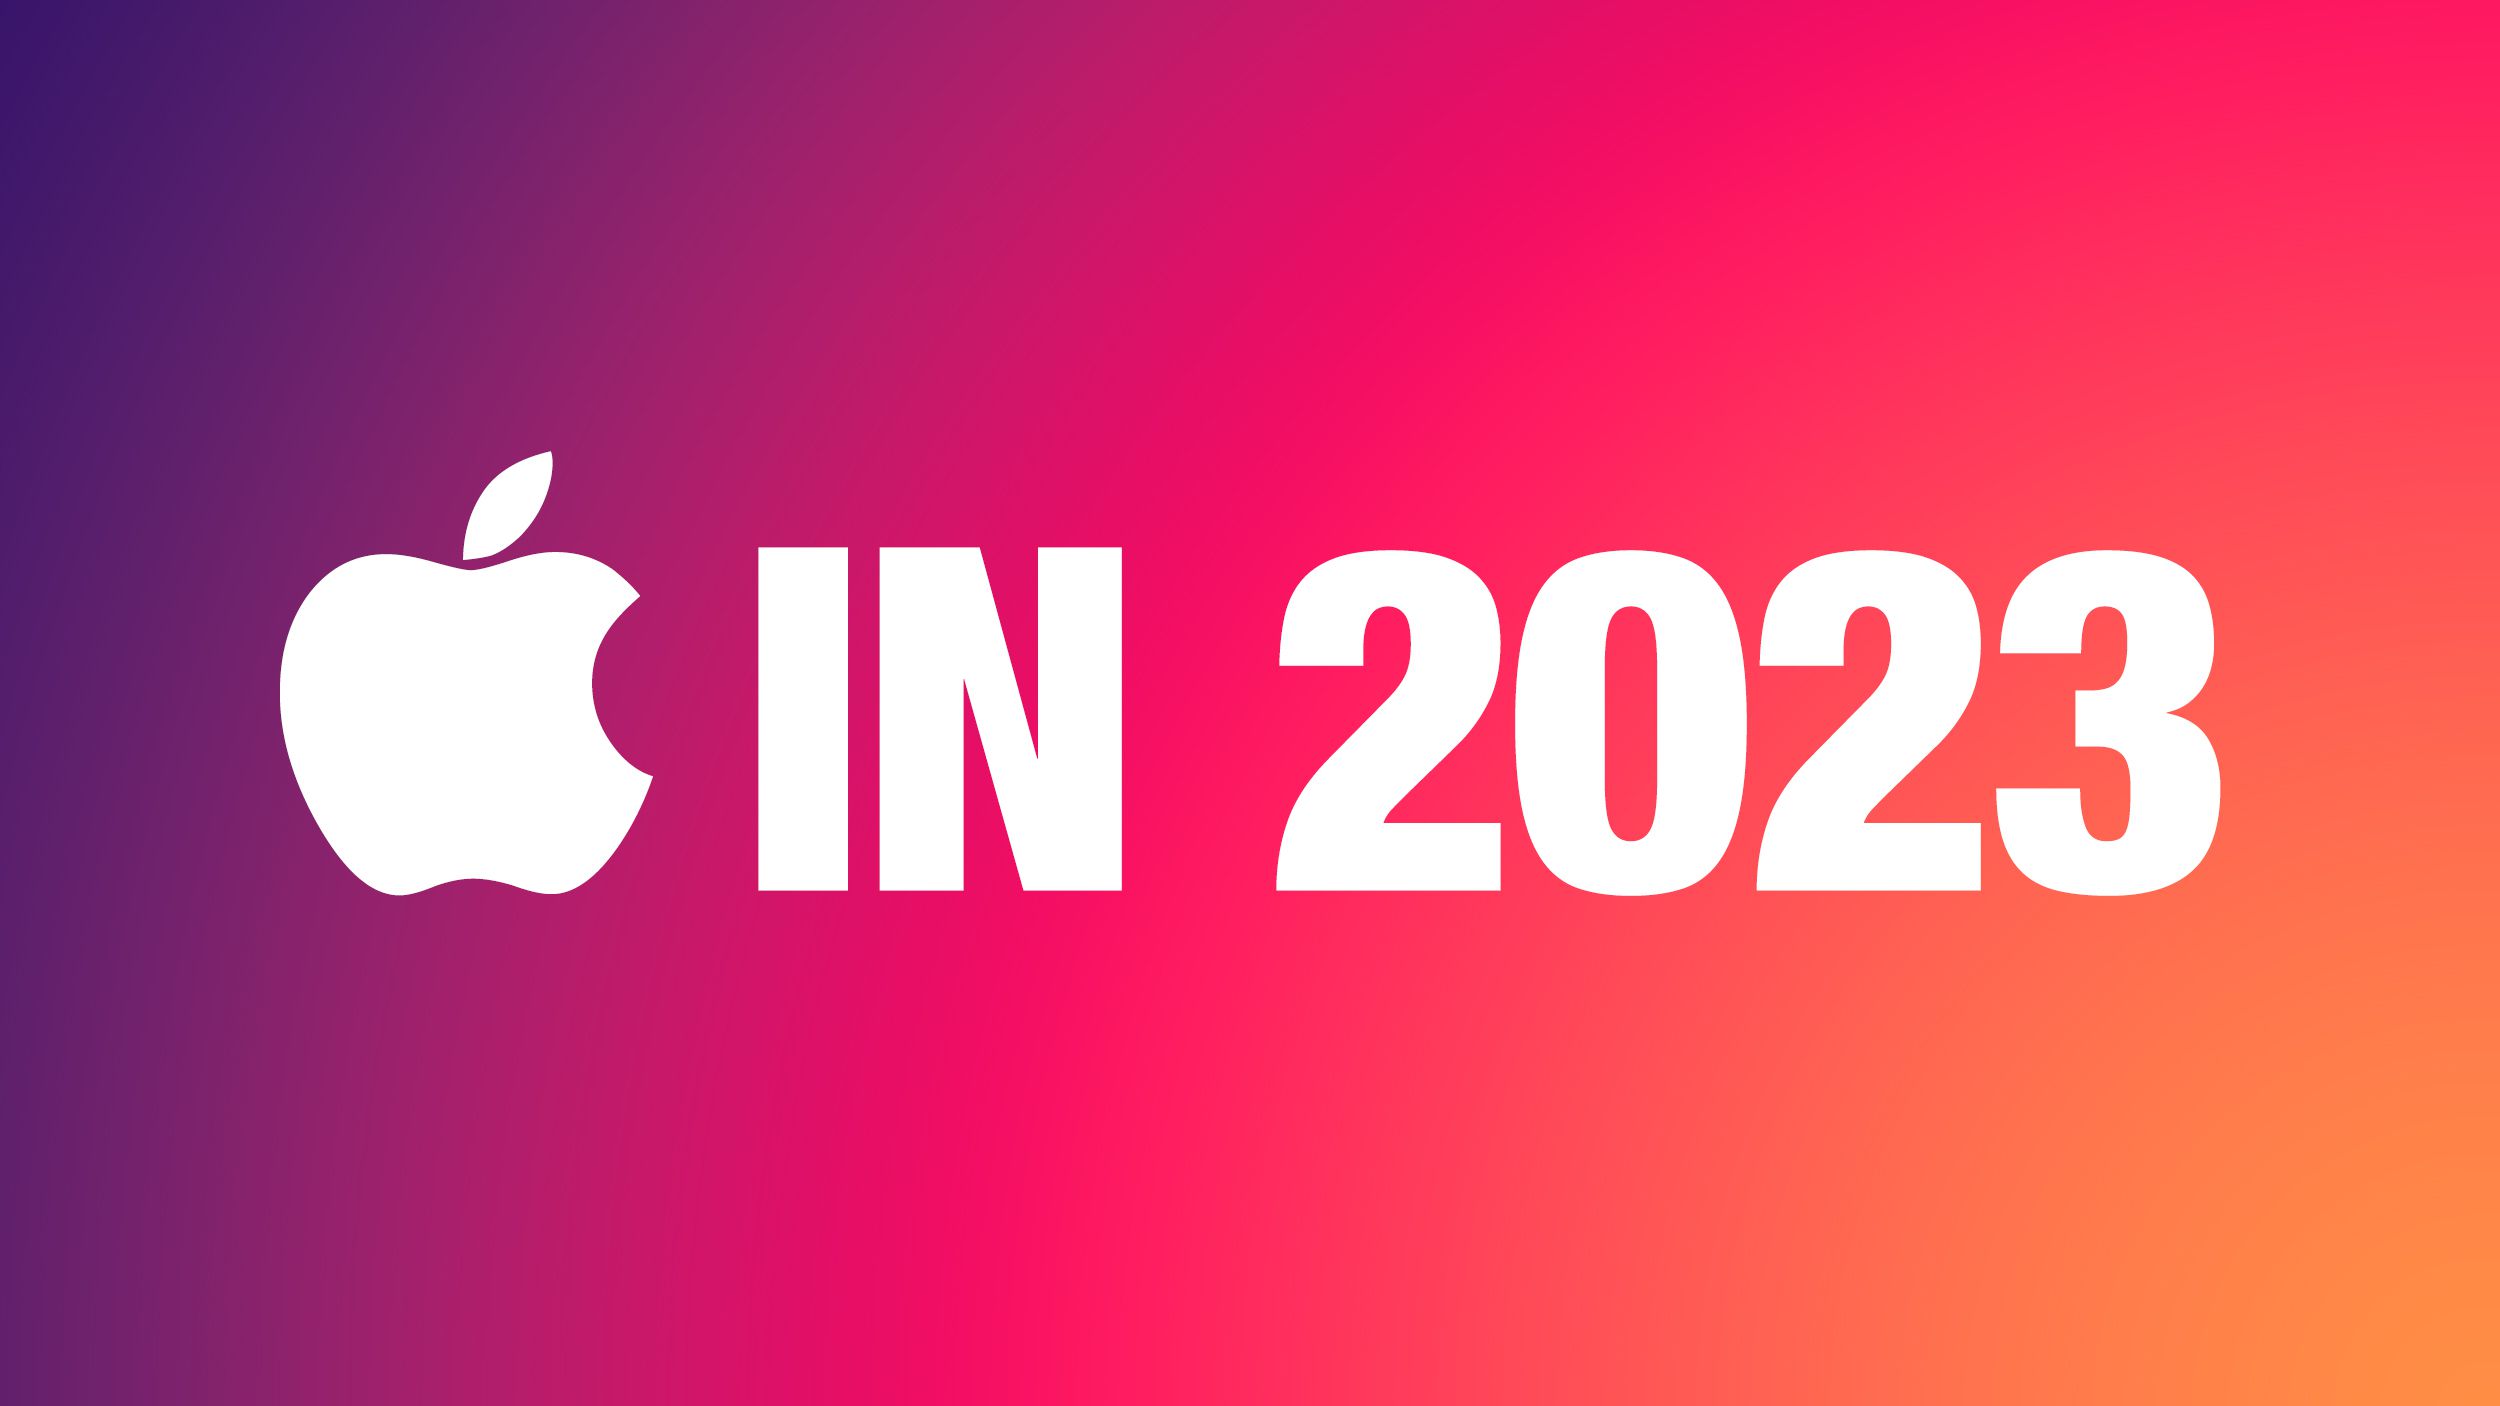 https://images.macrumors.com/t/Lacxm7DxCcuxwh_AasZctN94_ic=/2500x/article-new/2023/12/Apple-in-2023-Feature.jpg